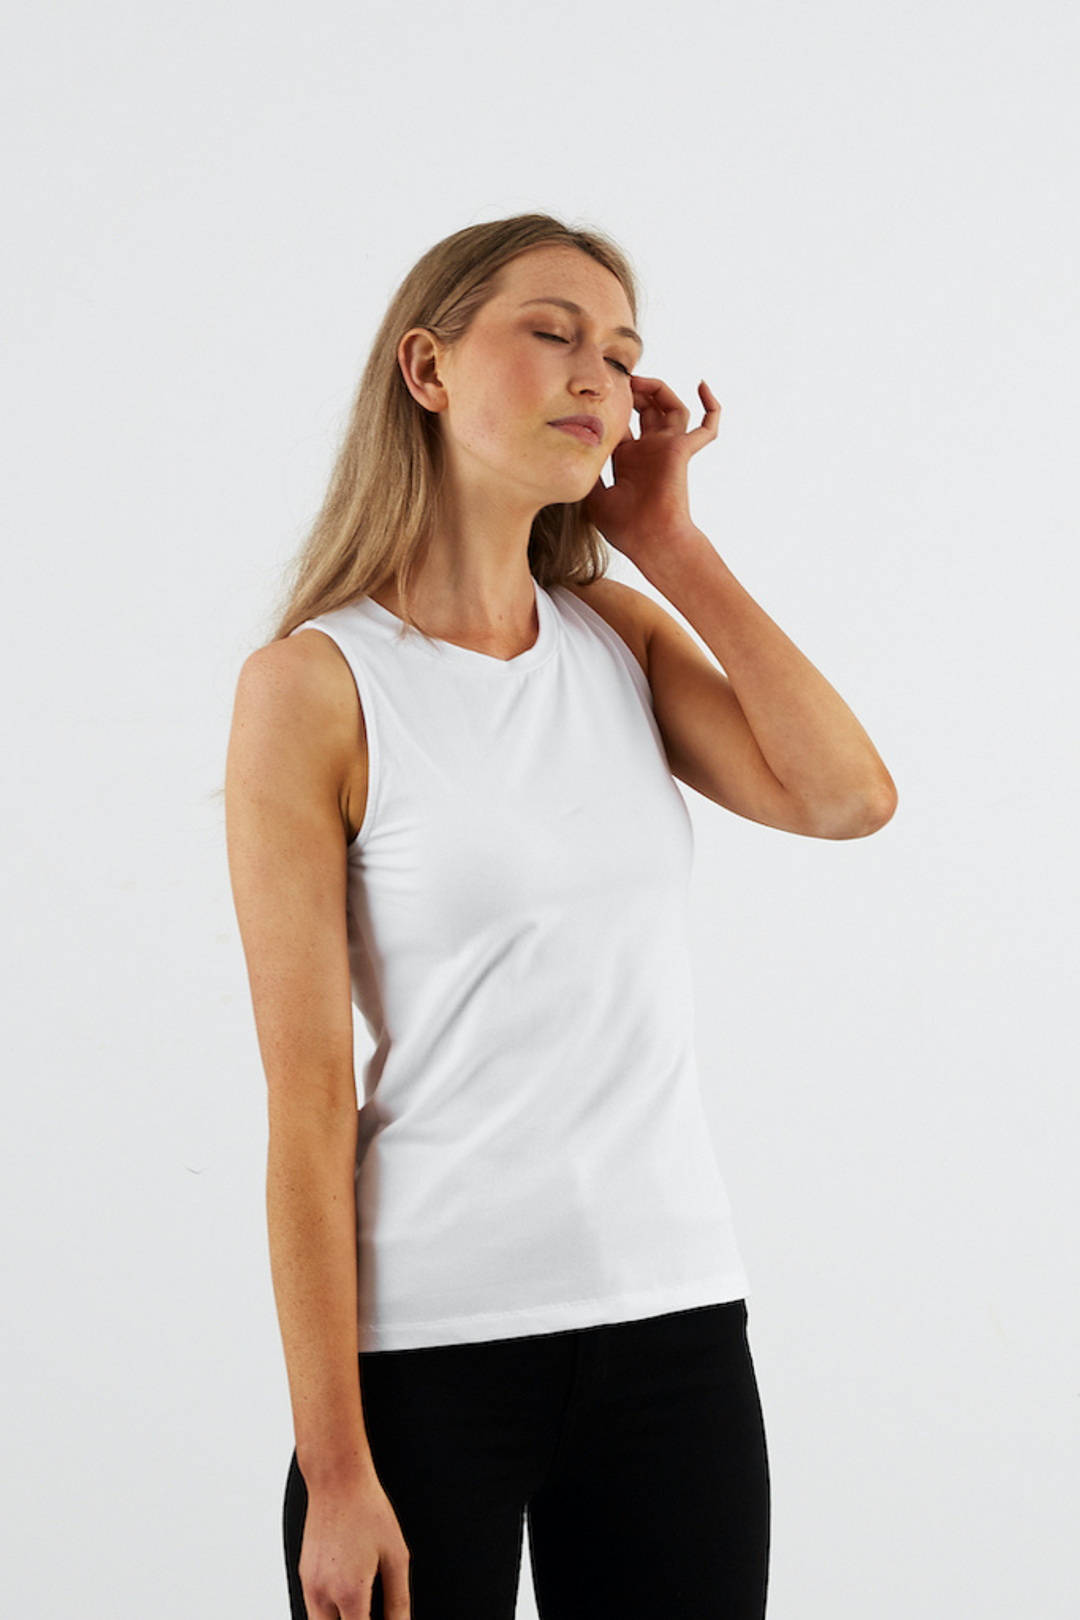 Staple Tank in White by Dorsu, available at ZERRIN 